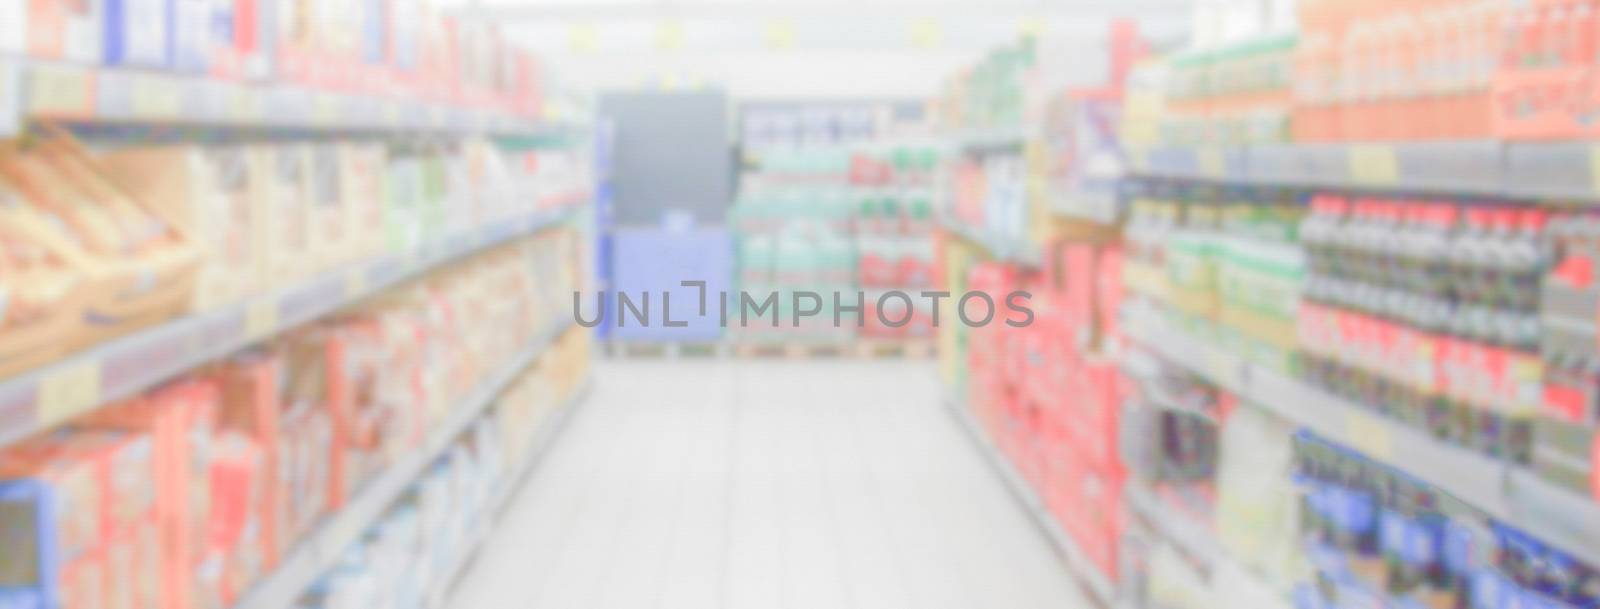 Defocused background with interiors of a supermarket or grocery  by marcorubino